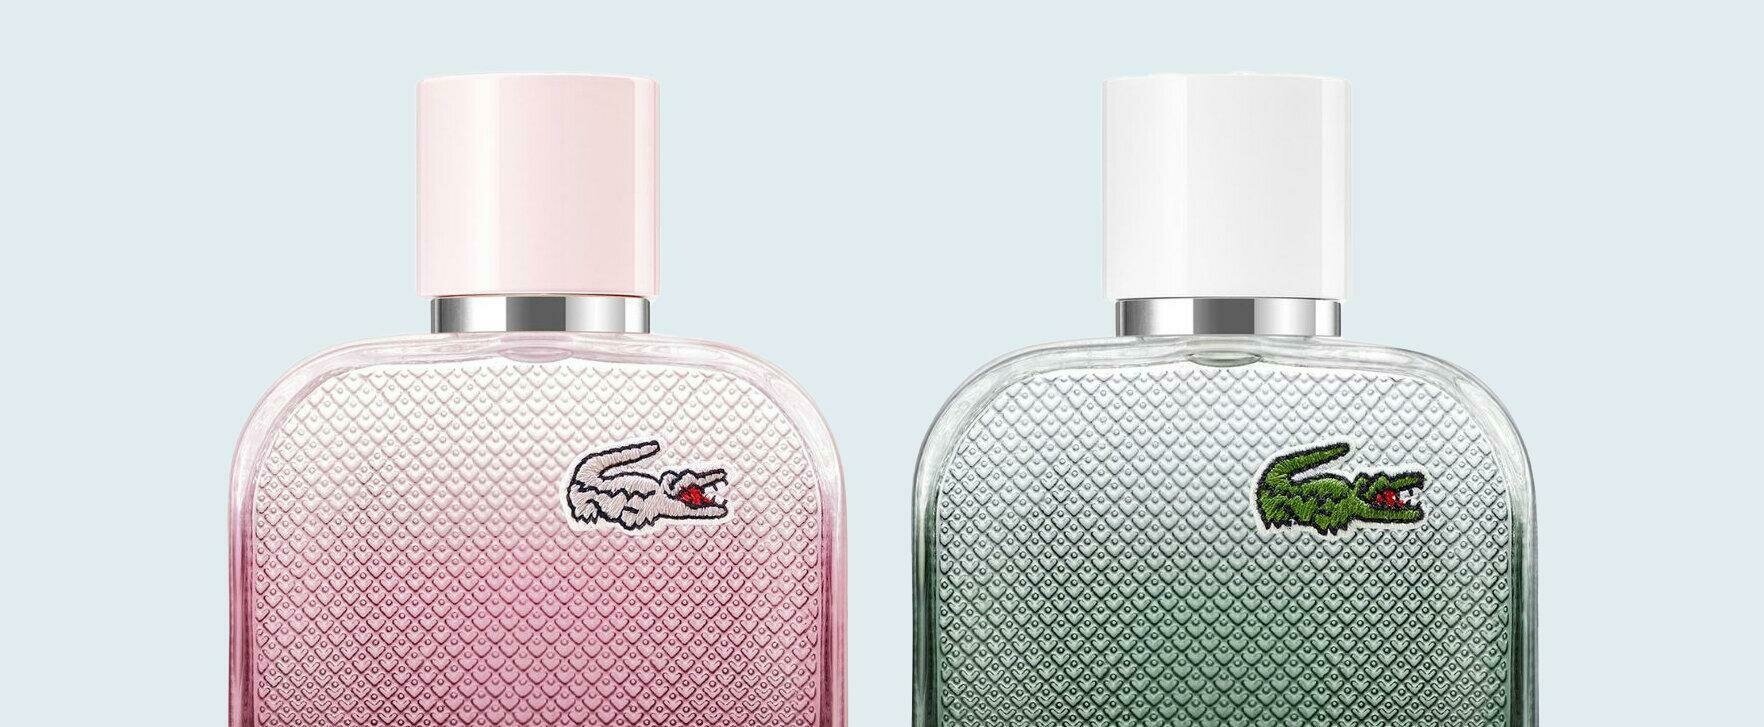 “L.12.12. Rose Eau Intense” and “L.12.12 Blanc Eau Intense”: The New Sporty Fragrance Duo From Lacoste